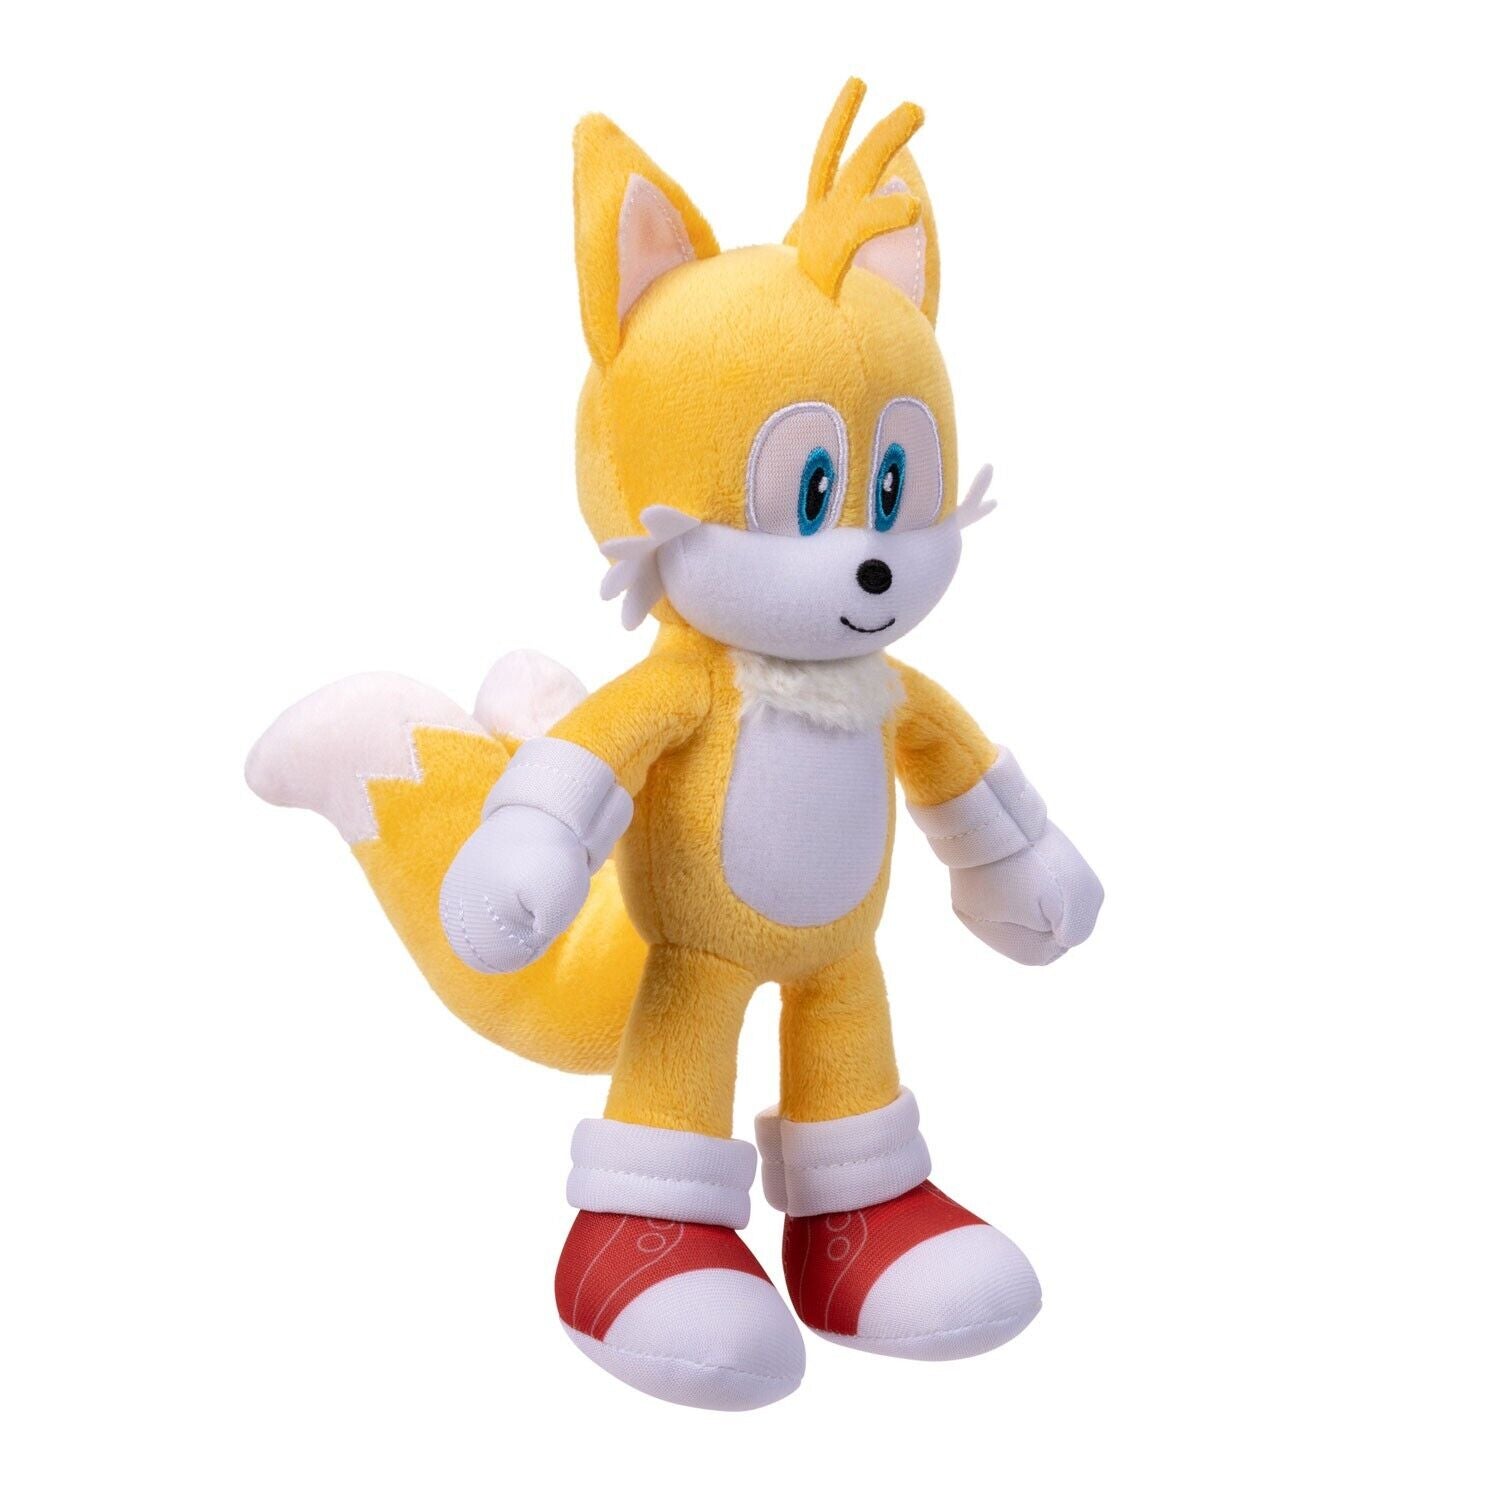 New Sonic The Hedgehog 2 Movie 9-Inch Plush Tails - Collectible Toy